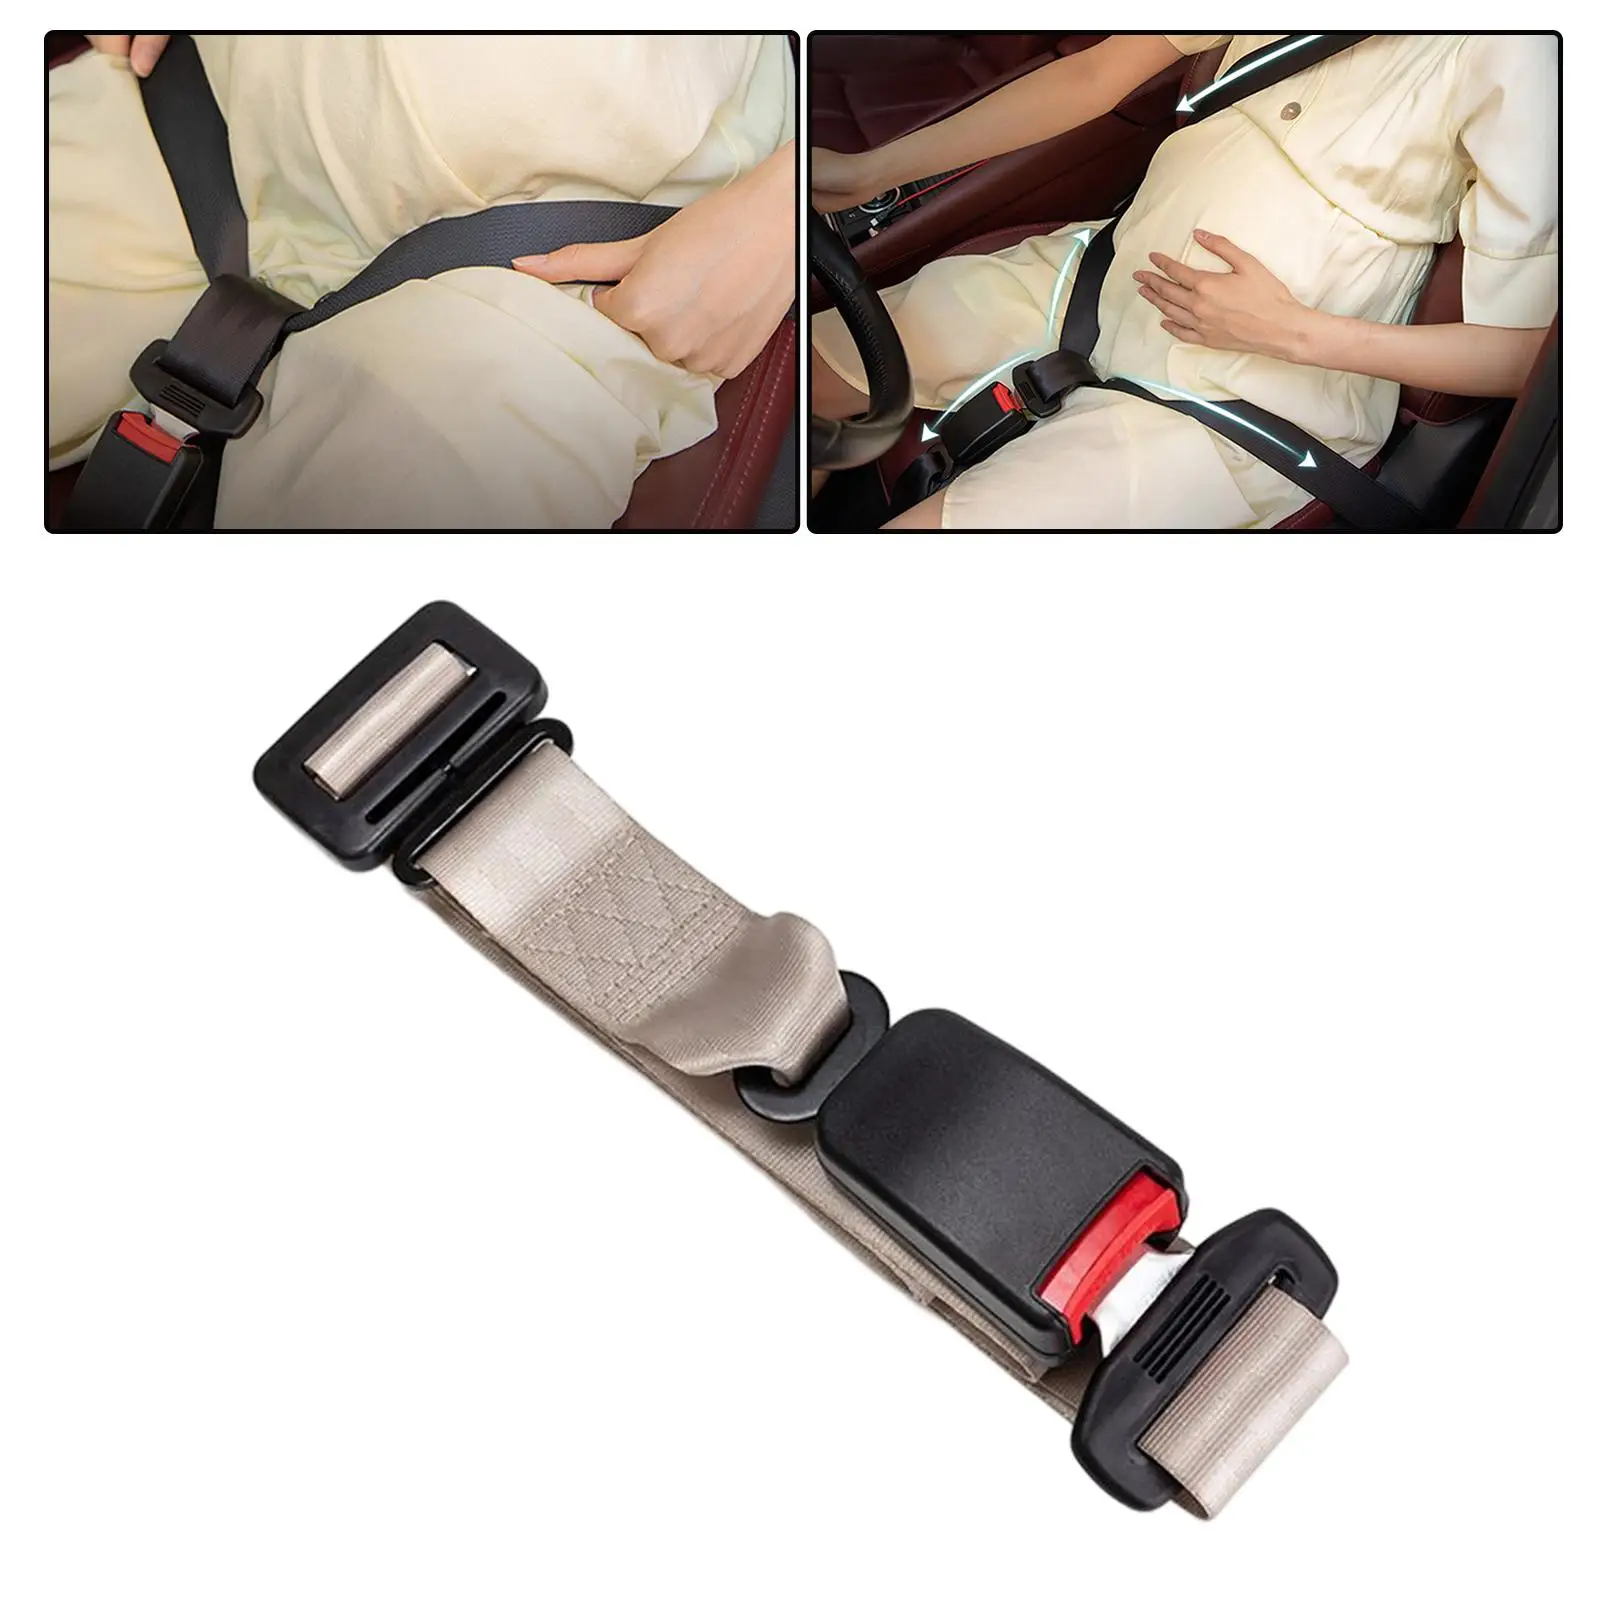 Pregnancy Car Seat Safety  Accessories Seat Bump Strap for Pregnancy Moms